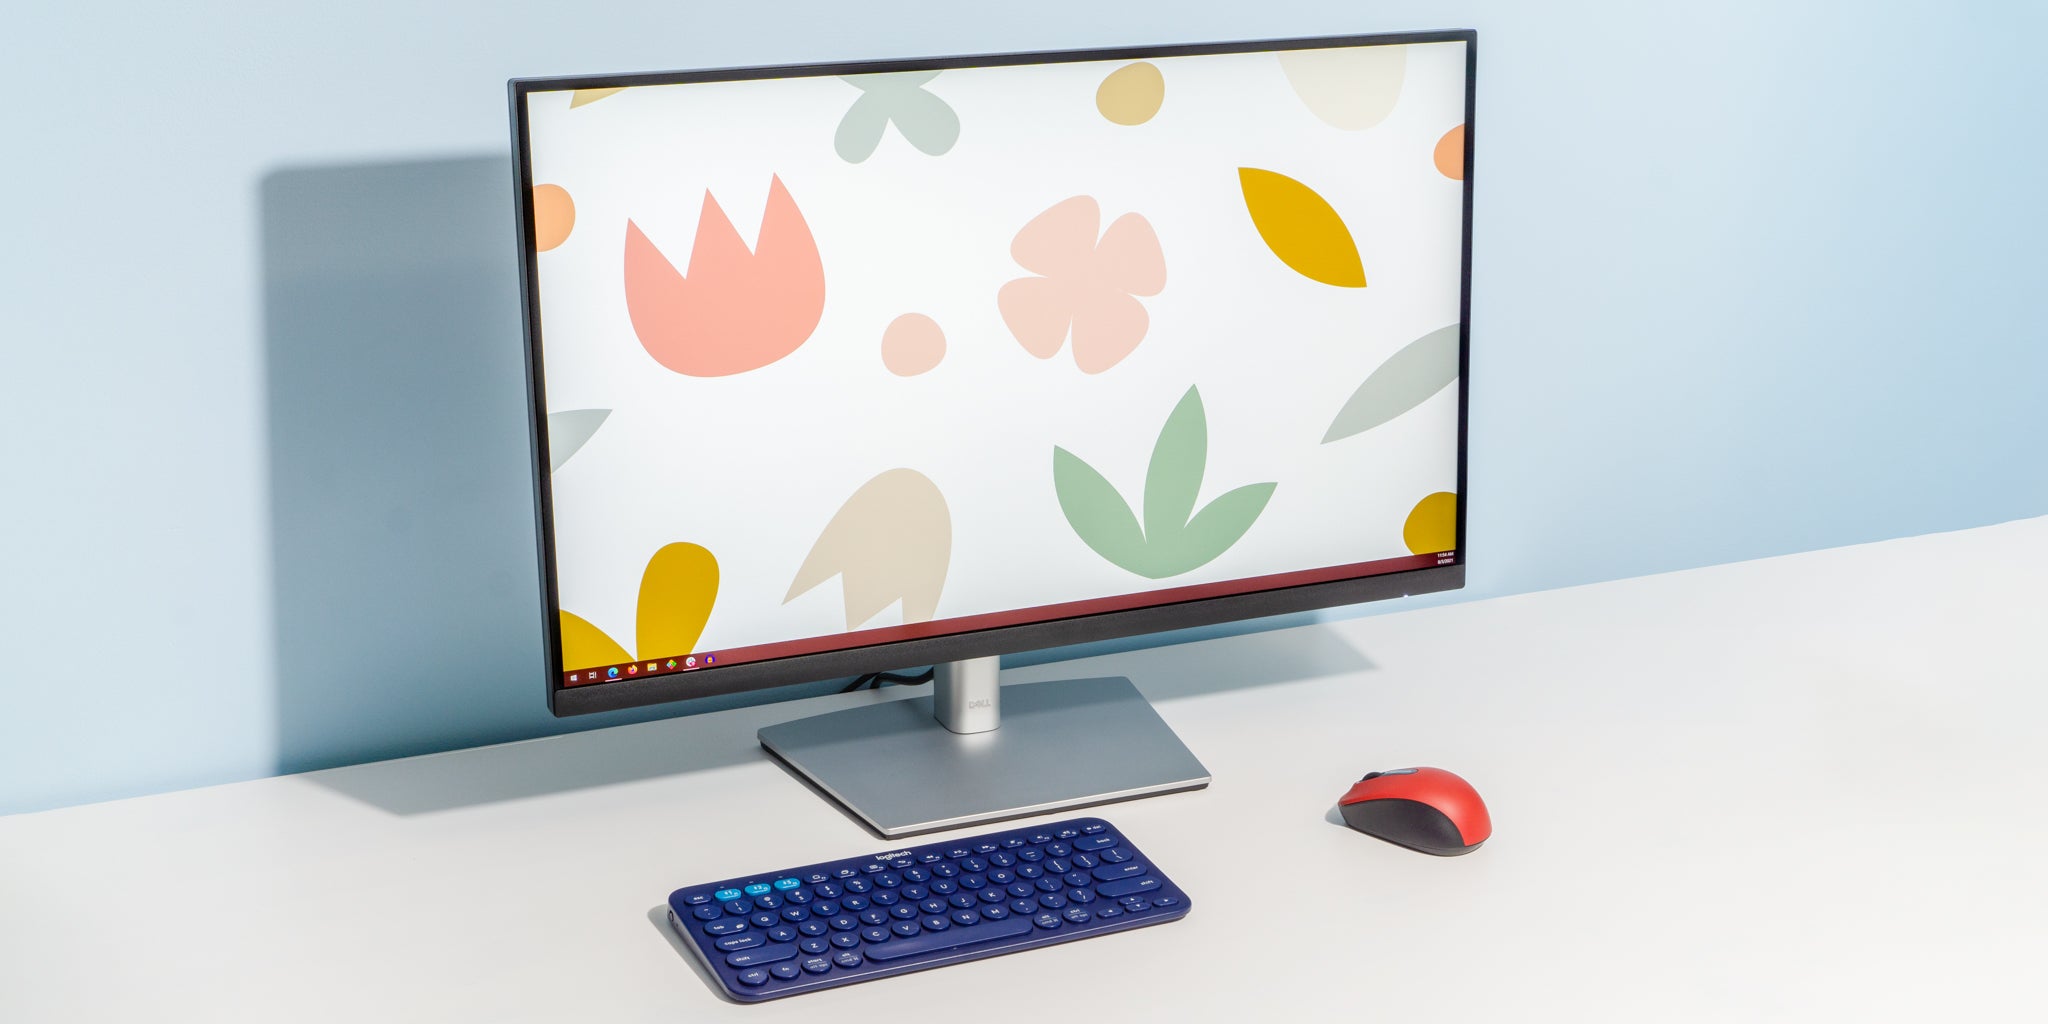 best 27 inch monitor for mac